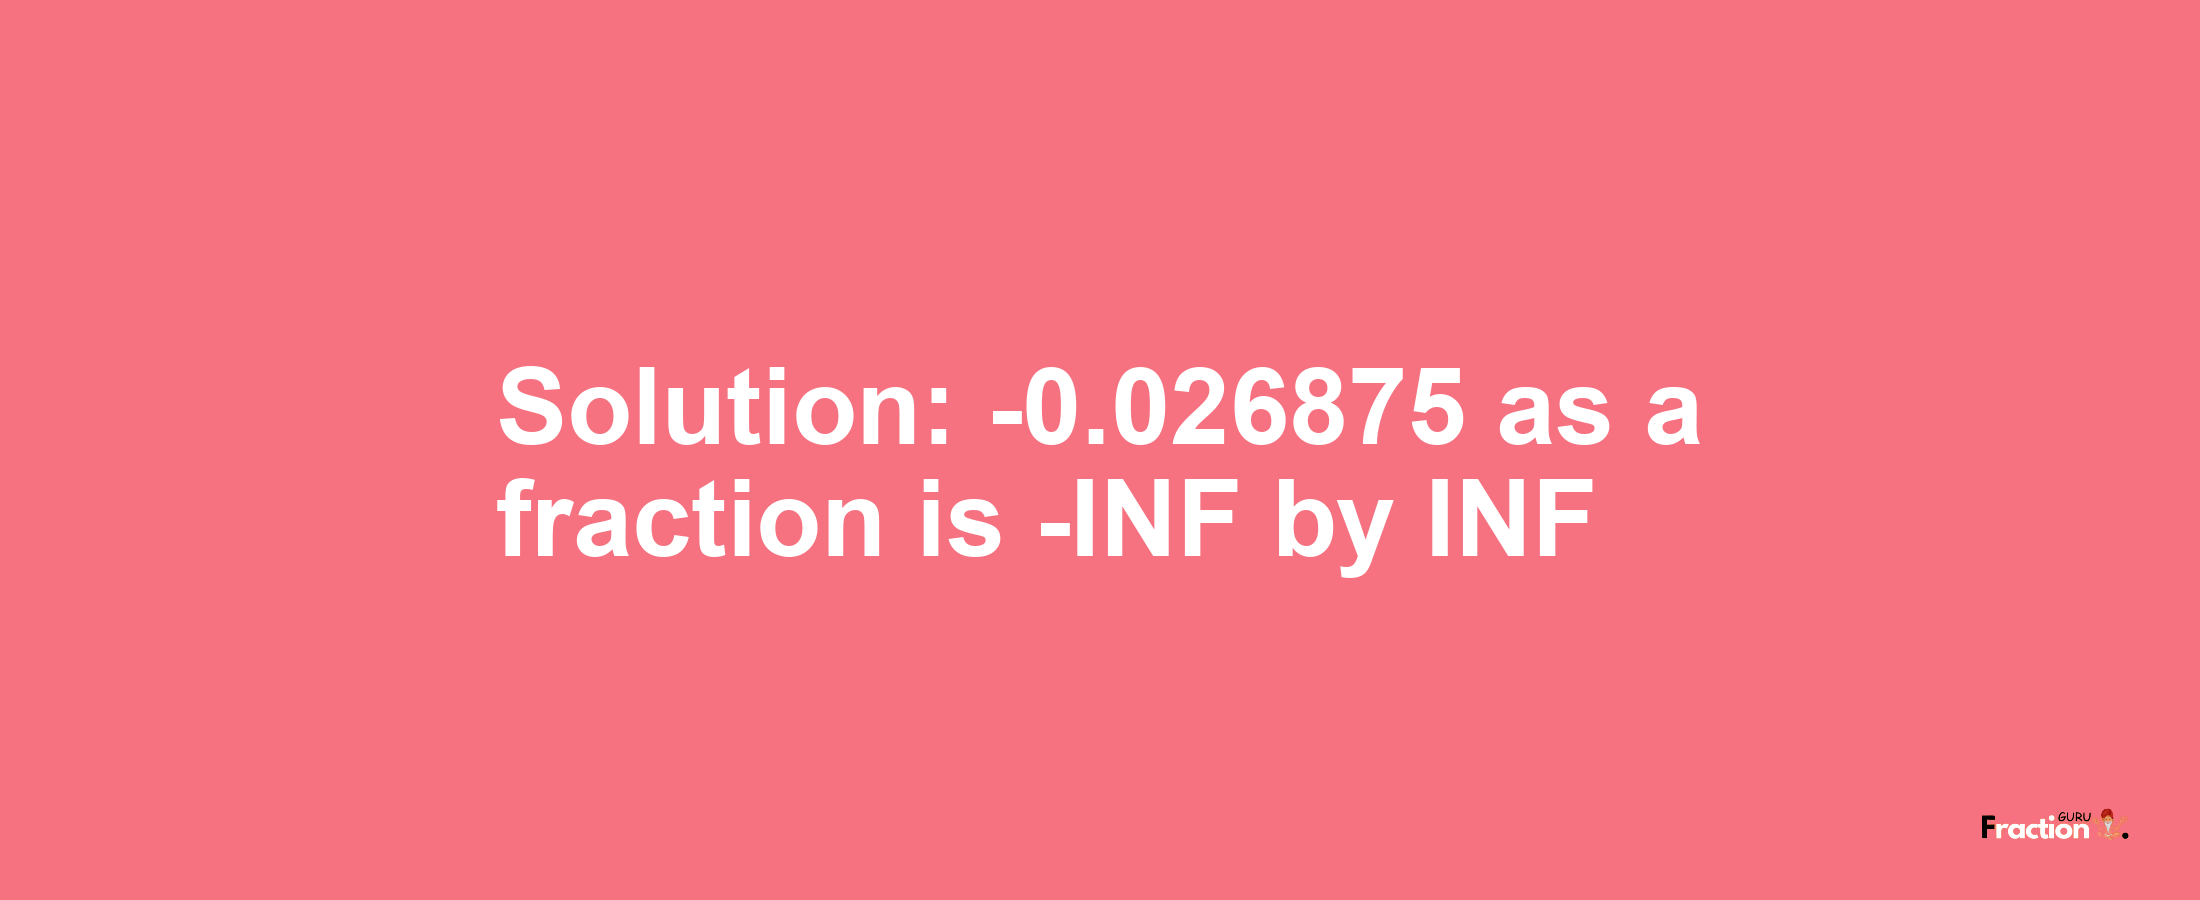 Solution:-0.026875 as a fraction is -INF/INF